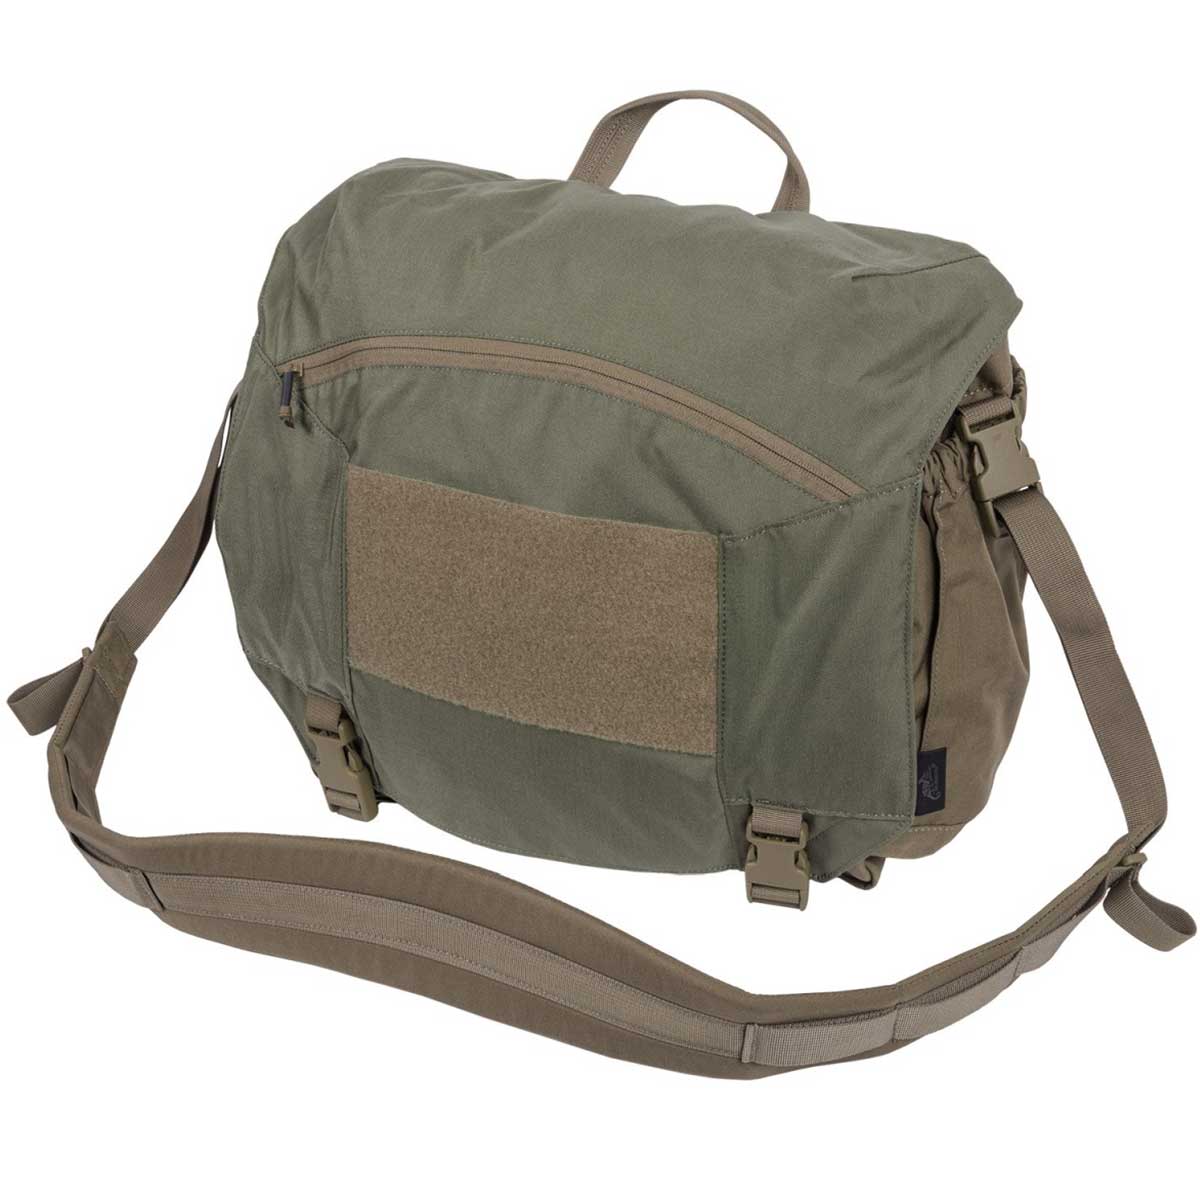 Torba Helikon Urban Courier Large 16 l - Adaptive Green/Coyote